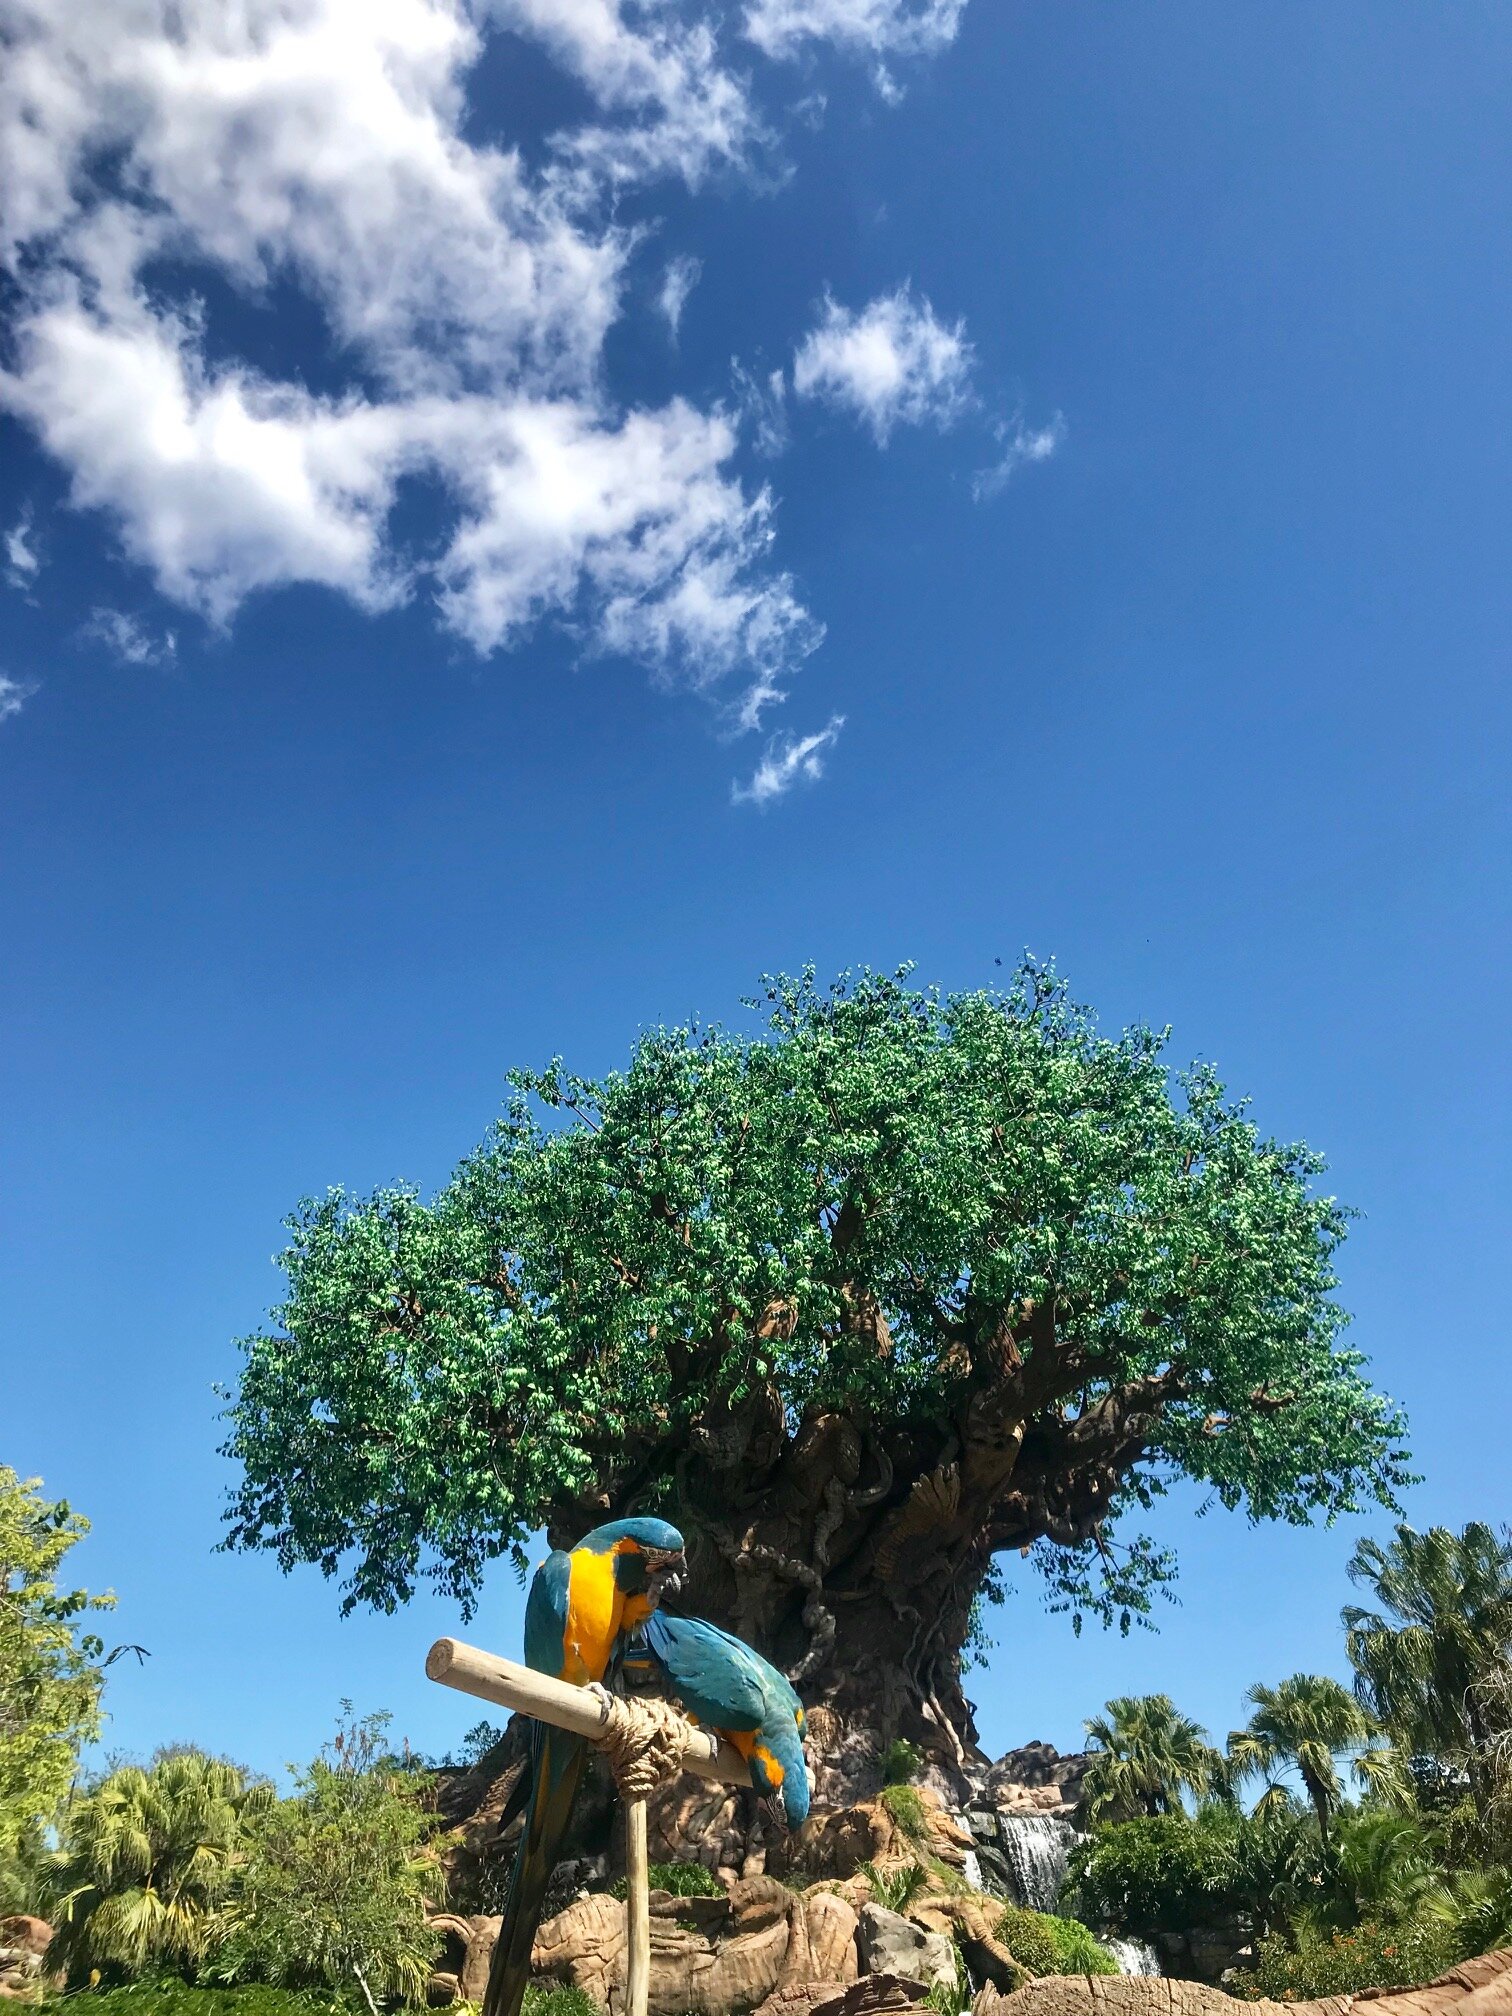 What to know on a first time trip to Walt Disney World, Florida: A bird show at Animal Kingdom